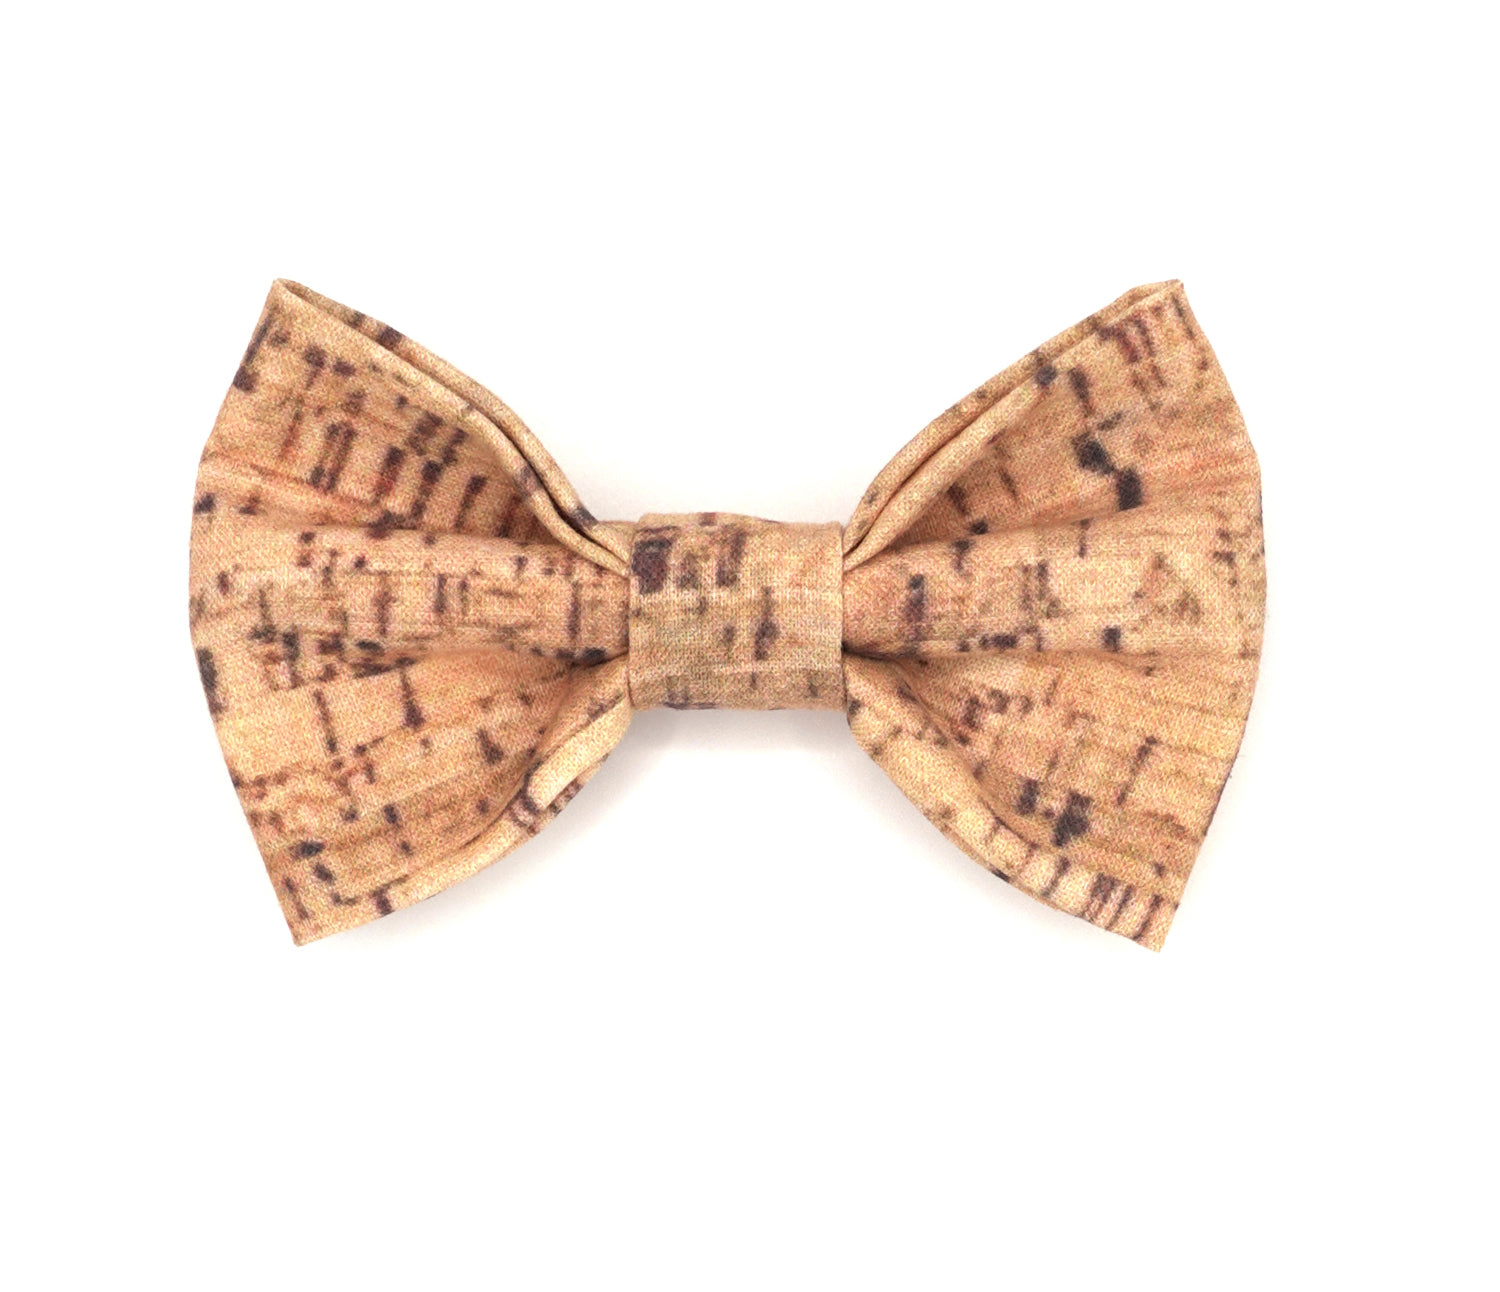 Handmade cotton bow tie for dogs (or other pets). Elastic straps on back with snaps make it easy to add to collar, harness, or leash. Tan/brown cork pattern.